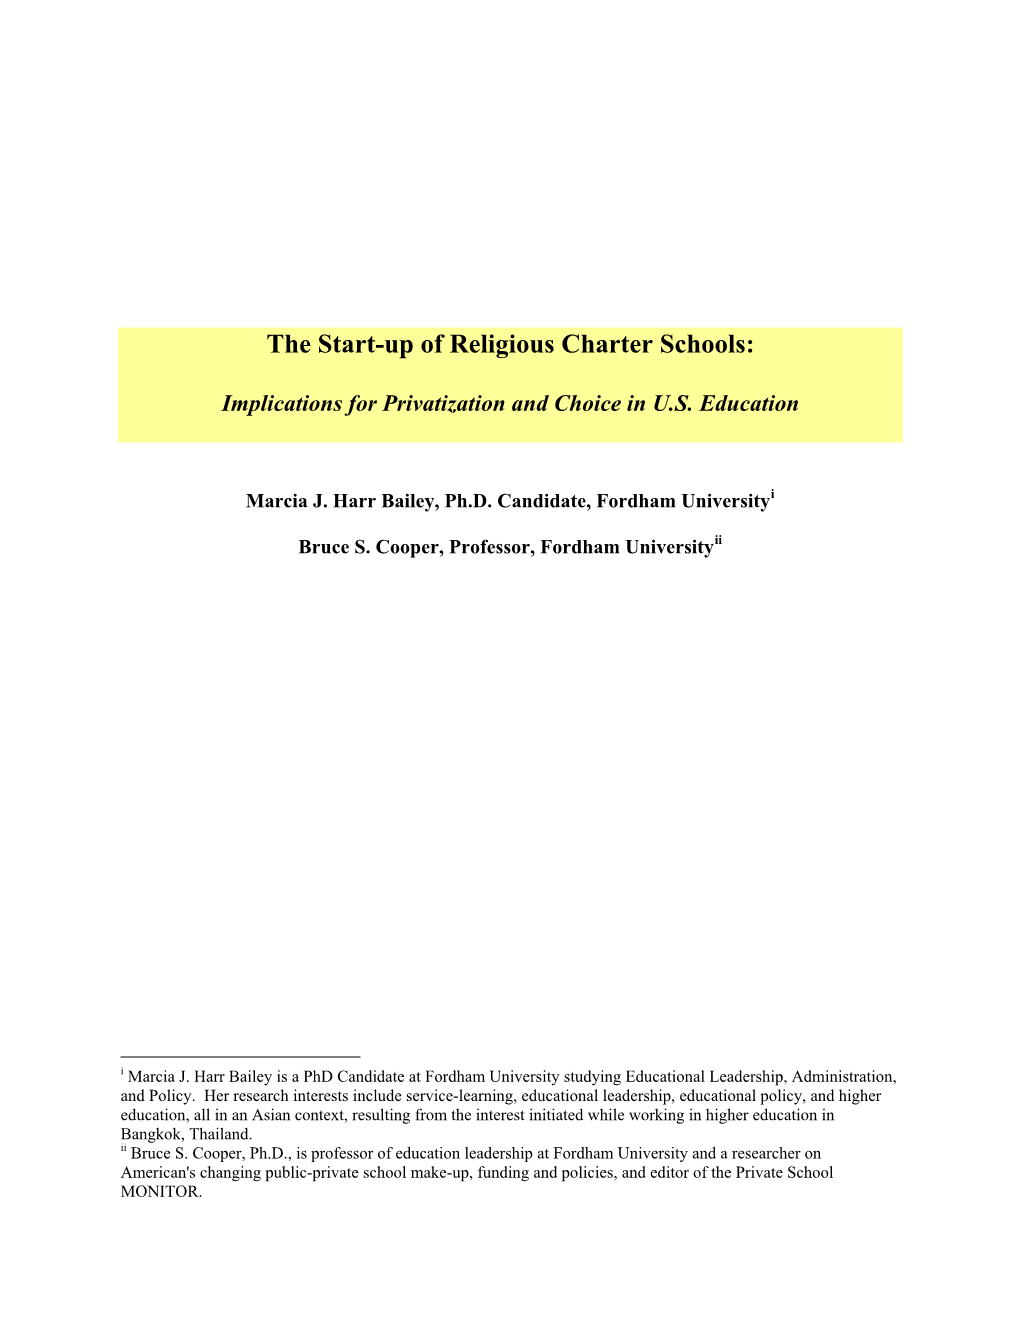 The Start-Up of Religious Charter Schools